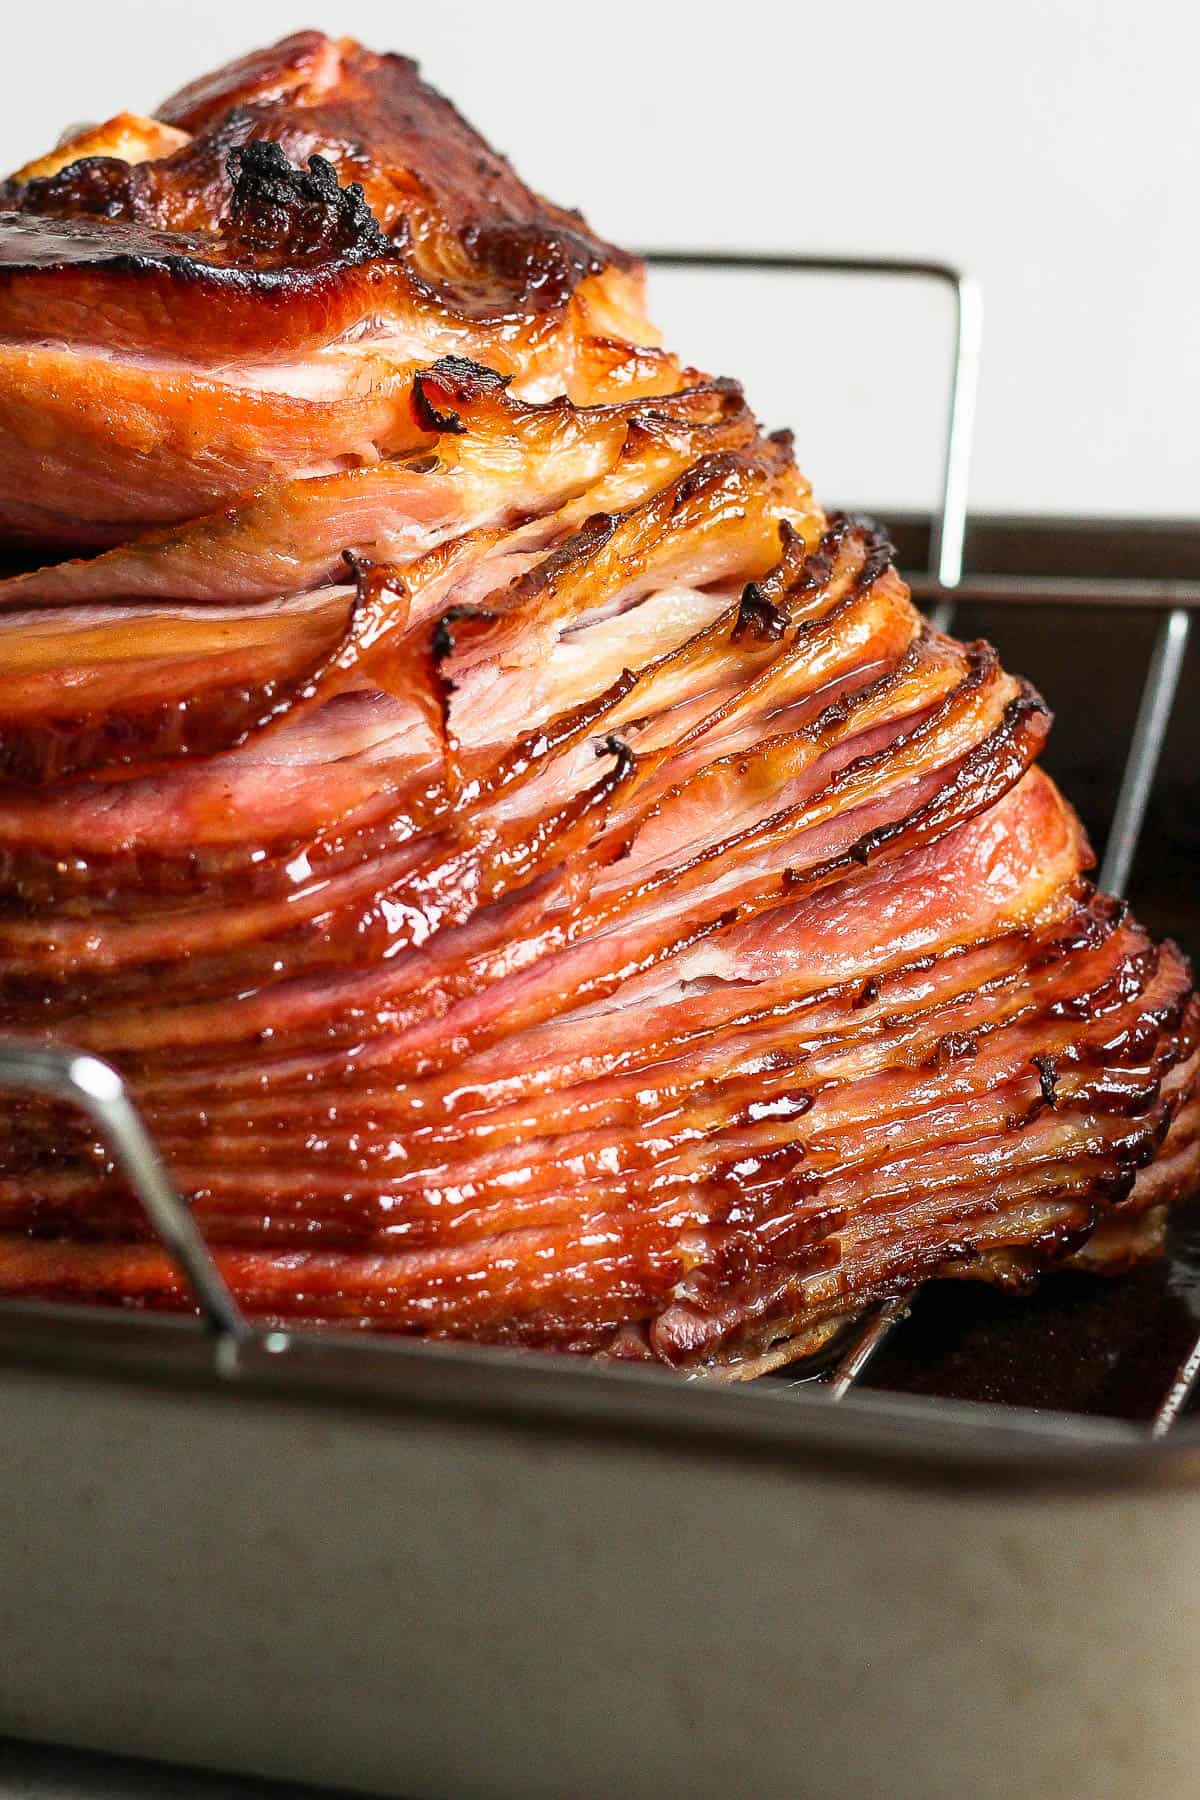 A close up of a cooked spiral ham on the roasting rack.